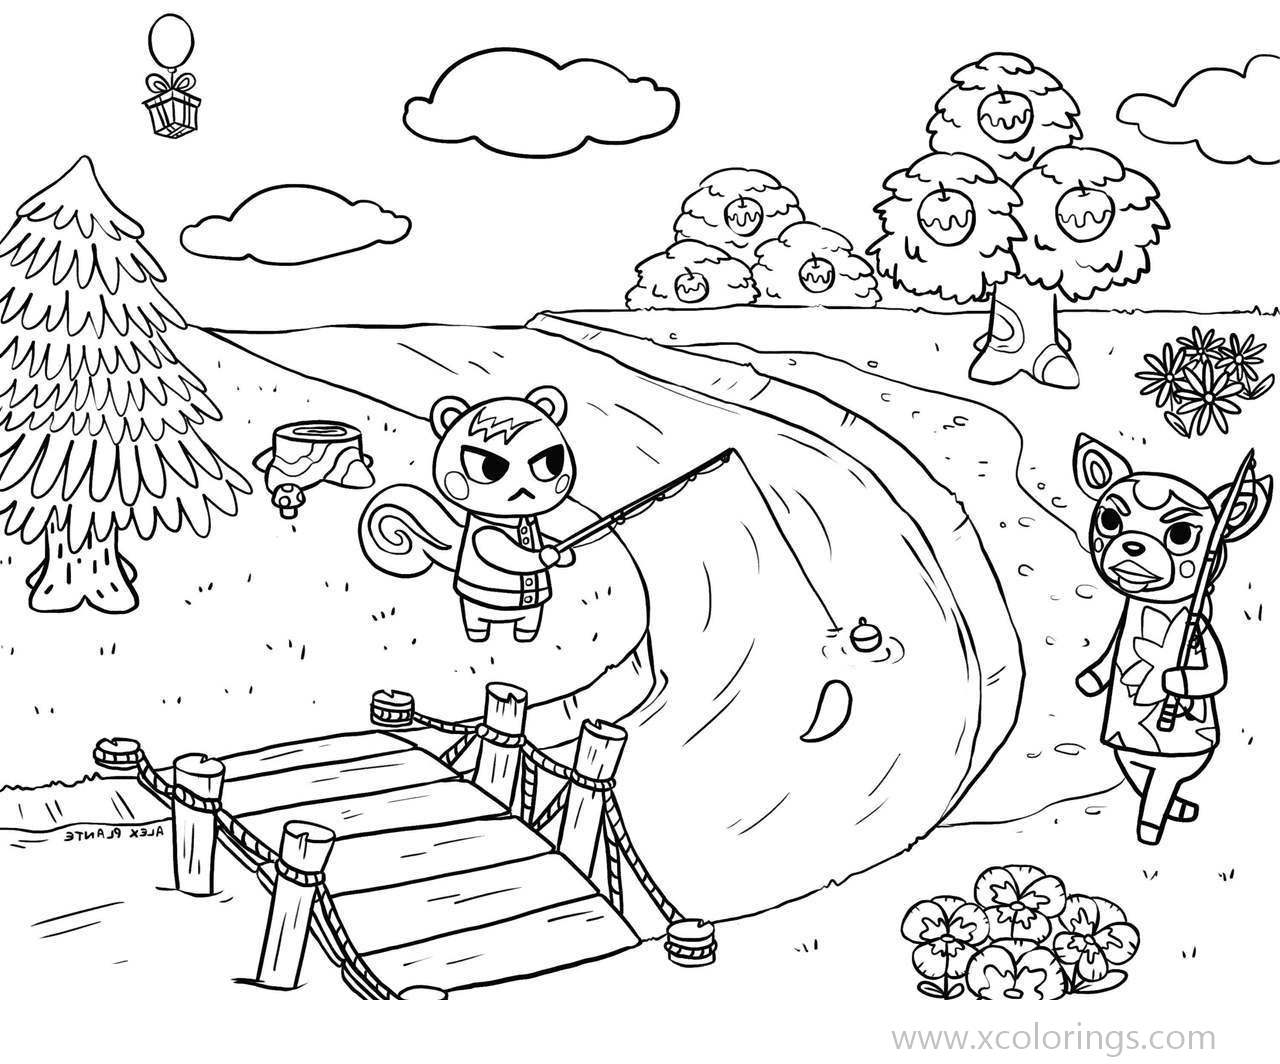 Free Animal Crossing Coloring Pages Fishing by the River printable